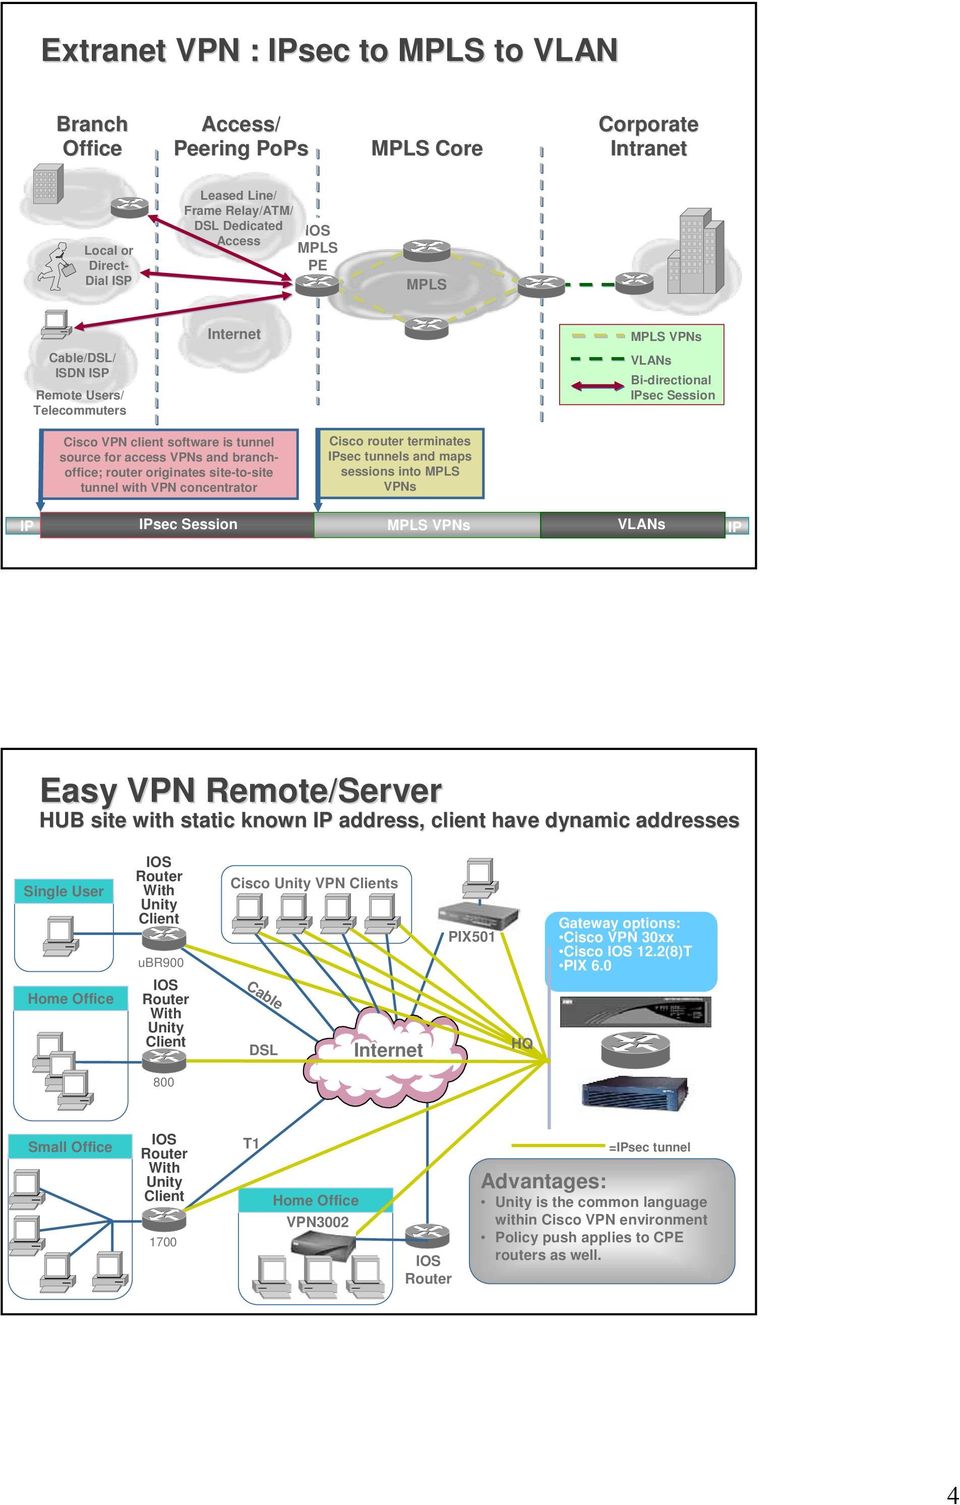 site-to-site tunnel with VPN concentrator Cisco router terminates IPsec tunnels and maps sessions into MPLS VPNs IP IPsec Session MPLS VPNs VLANs IP Easy VPN Remote/Server HUB site with static known